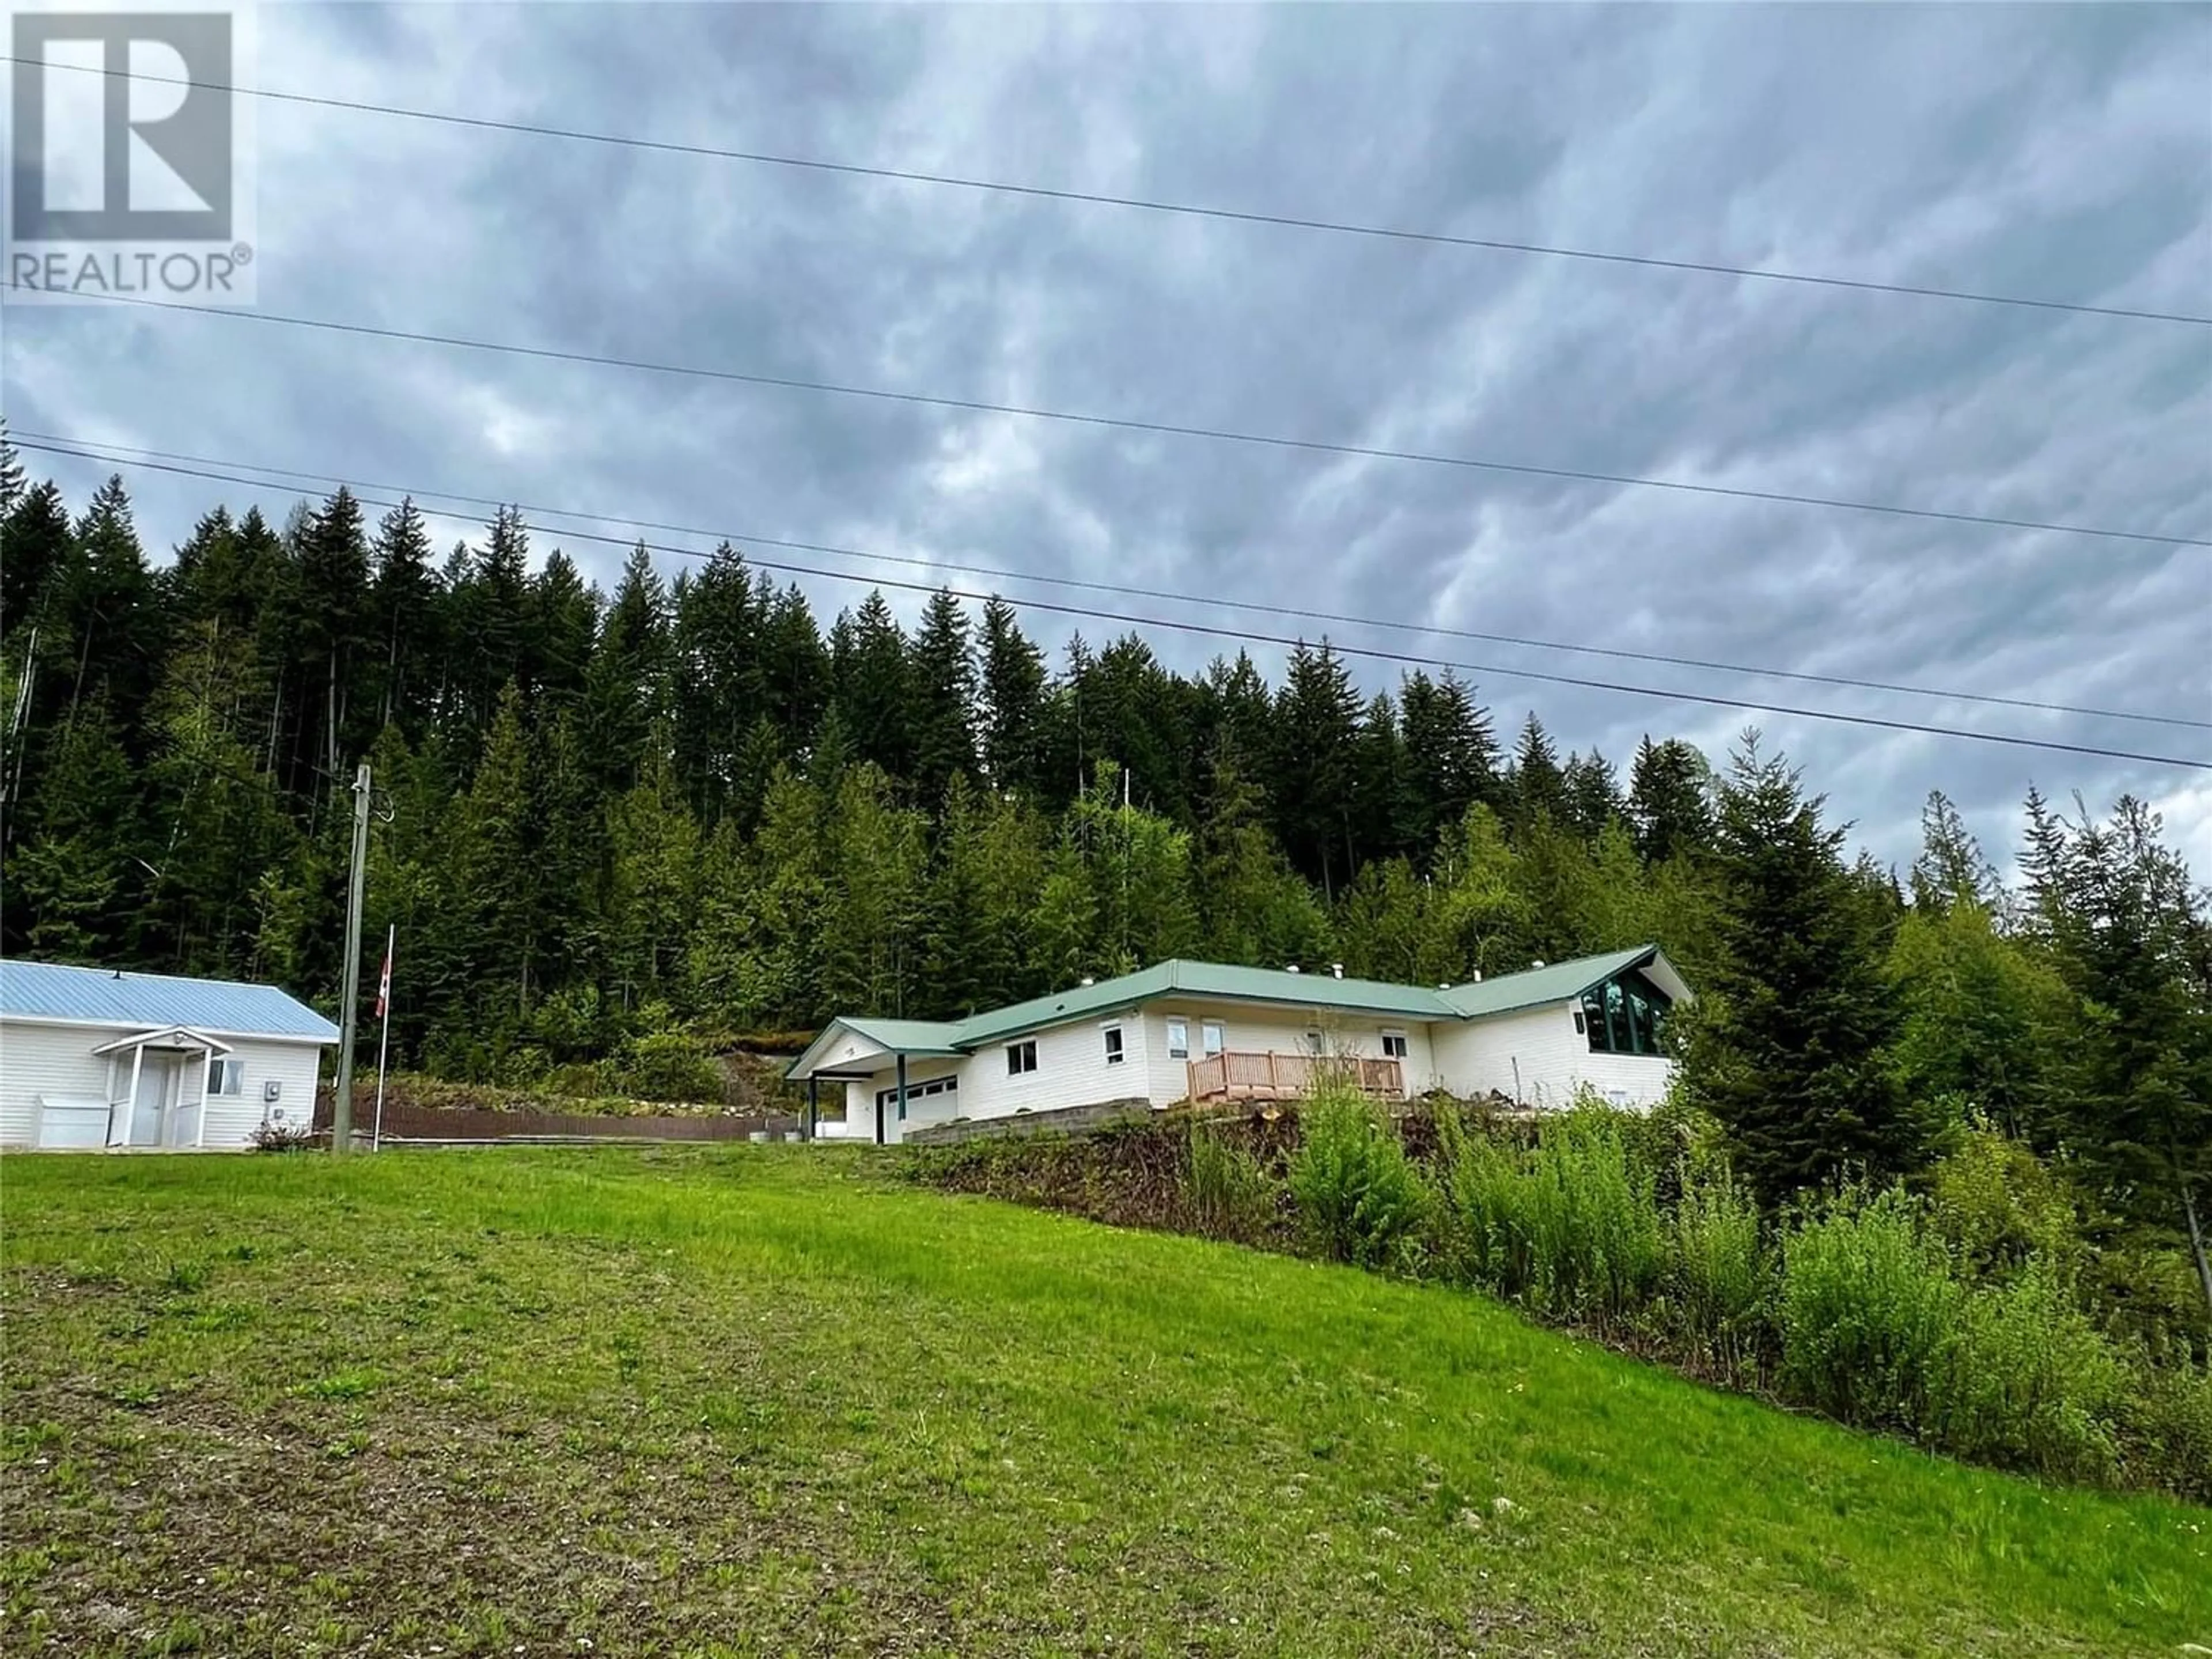 Outside view for 3834 Settle Road, Tappen British Columbia V0E2W0